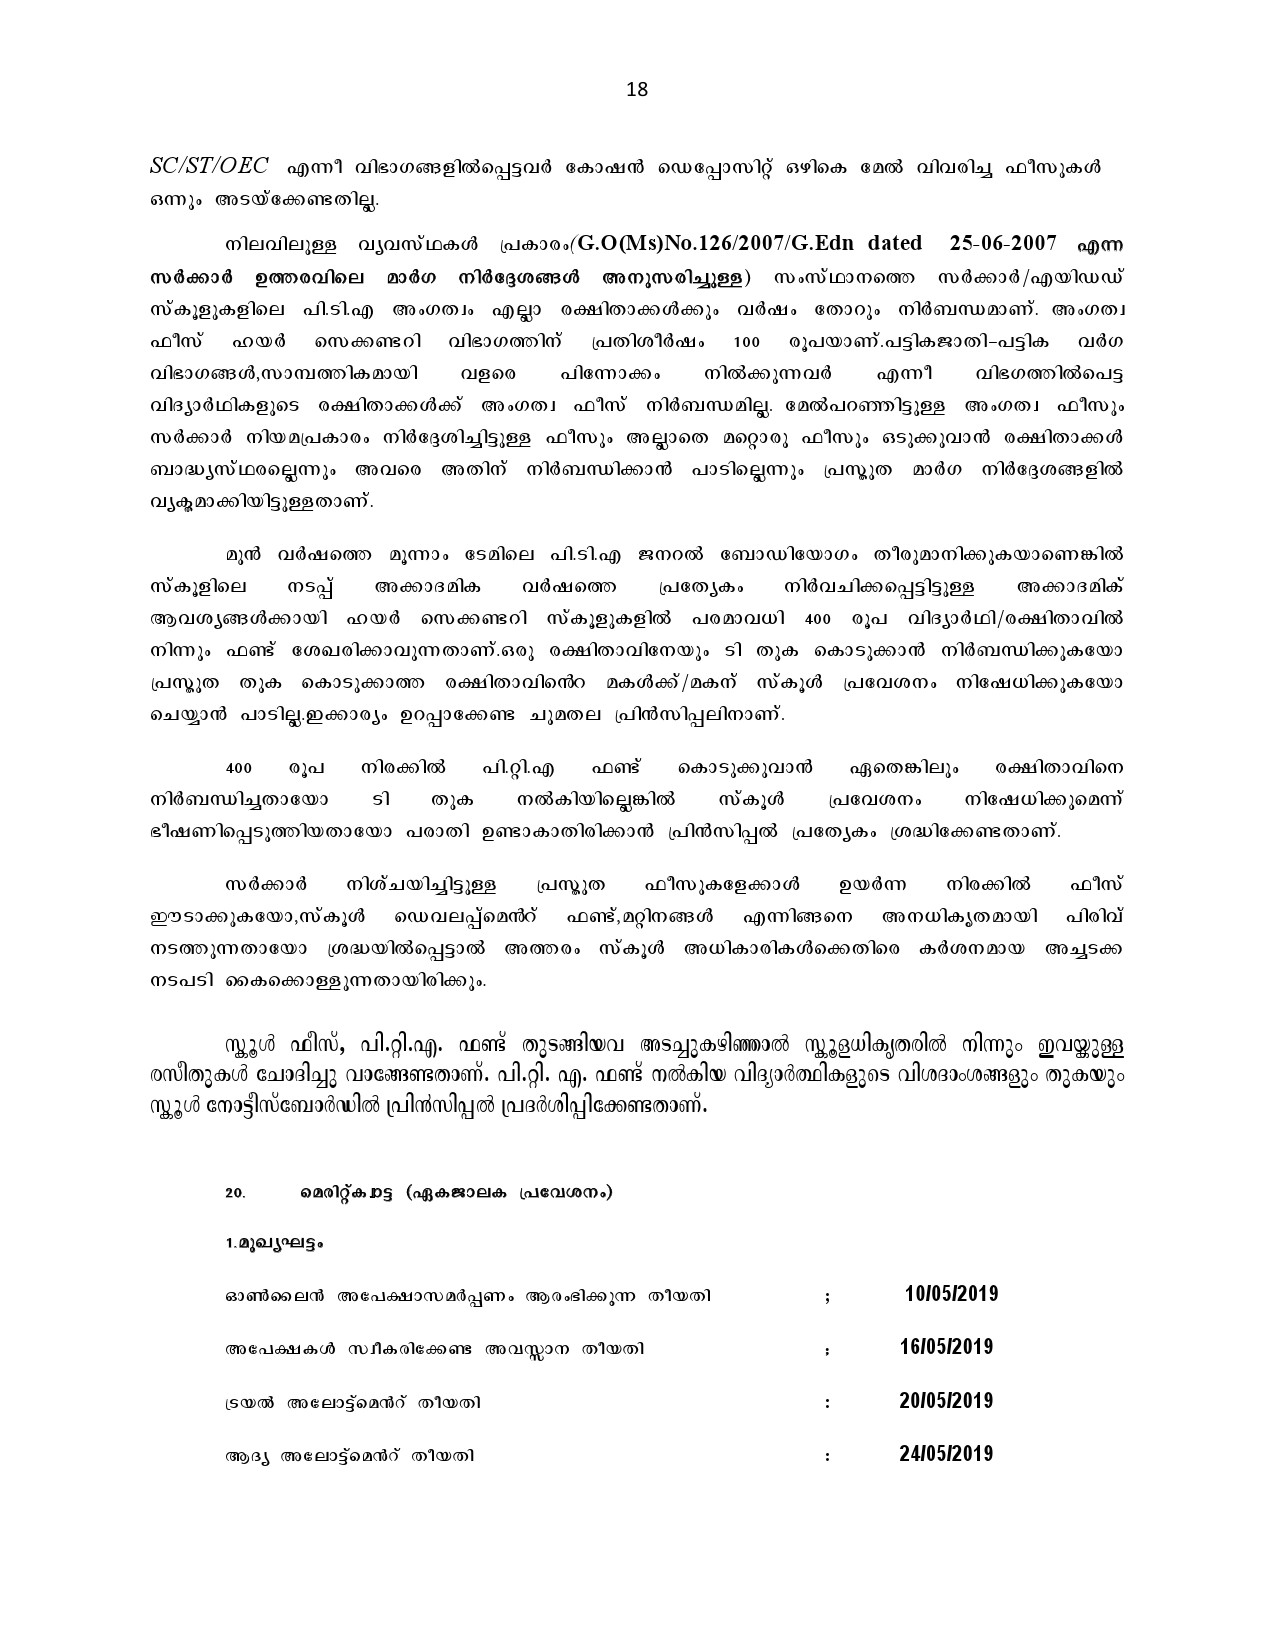 How To Apply For Kerala Higher Secondary Admission 2019 - Notification Image 18